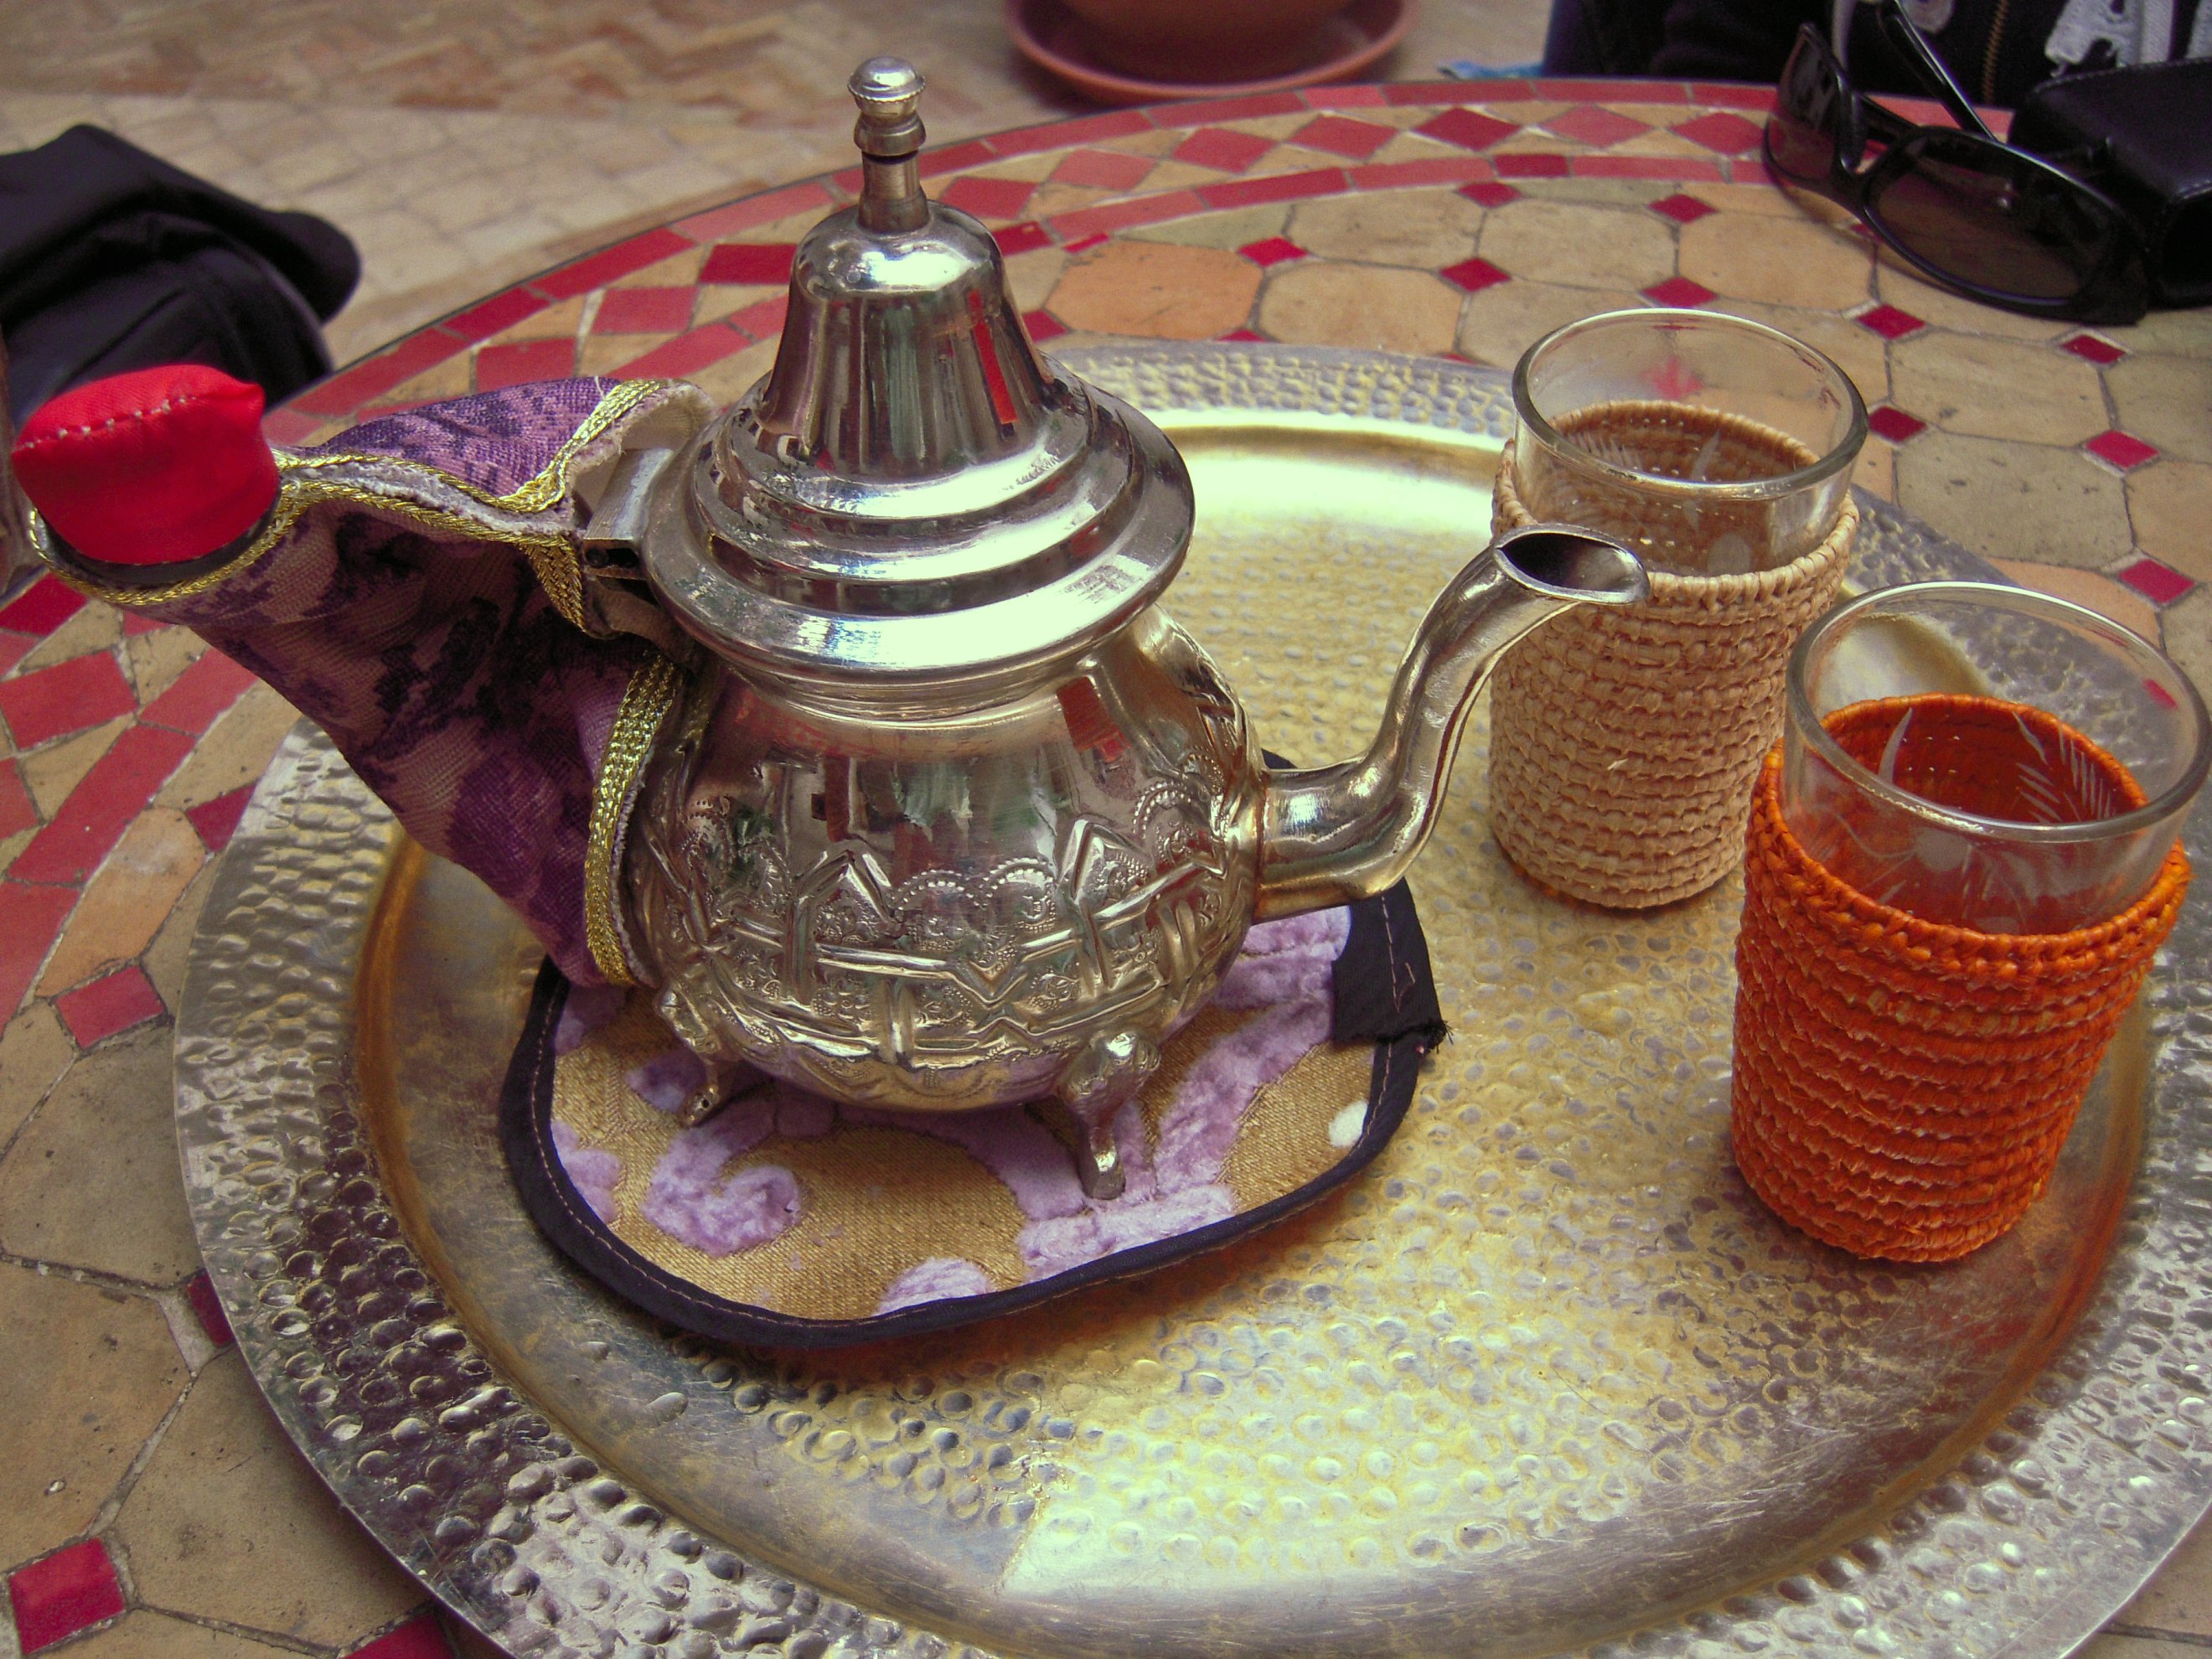 Tea served in a Moroccan pot